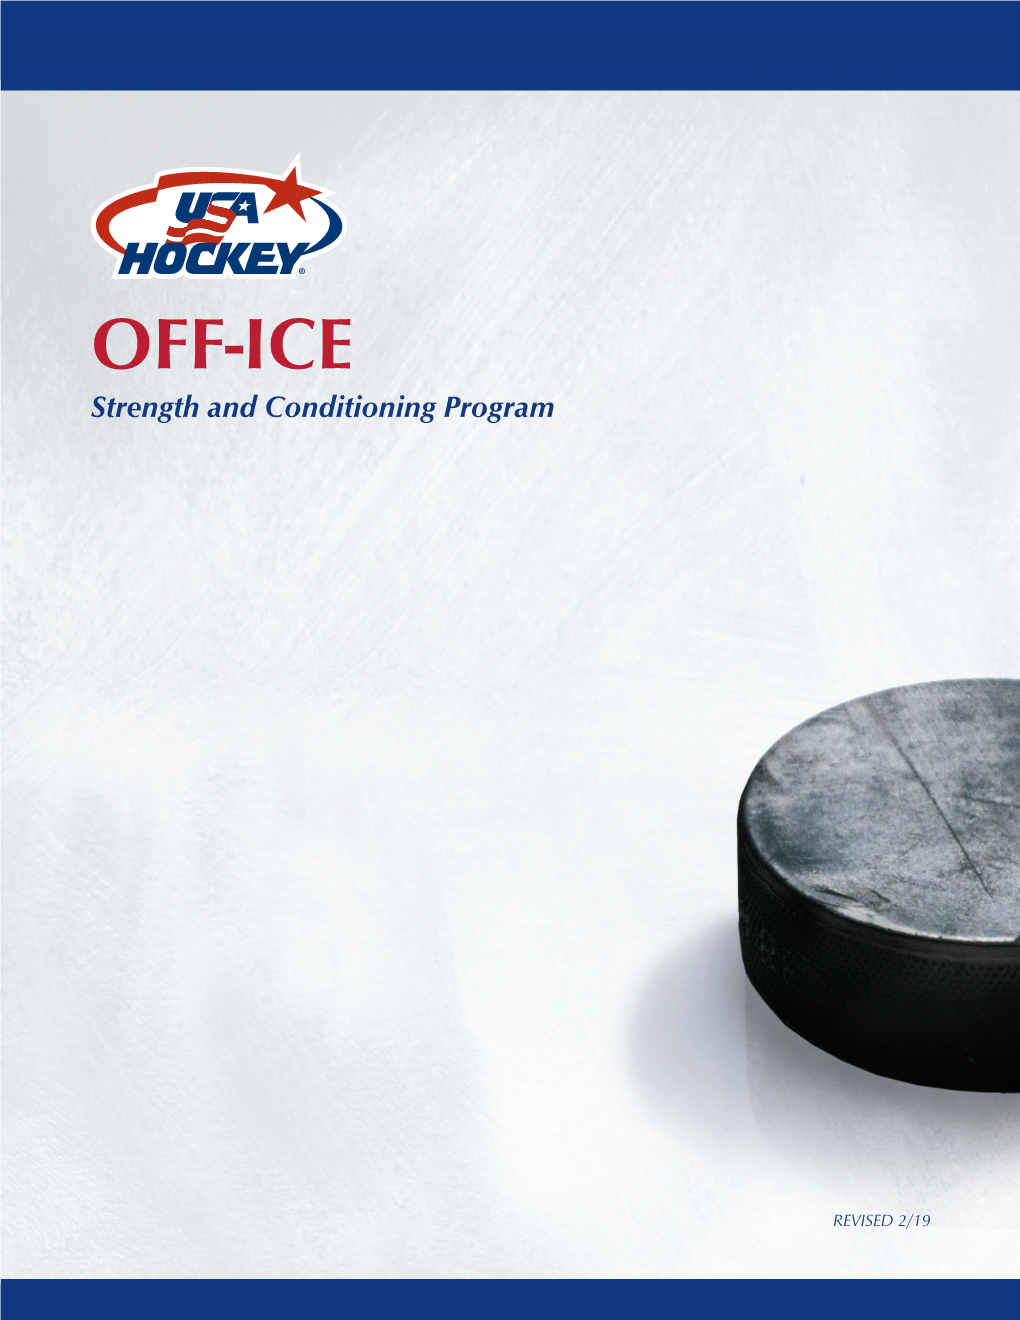 OFF-ICE Strength and Conditioning Program